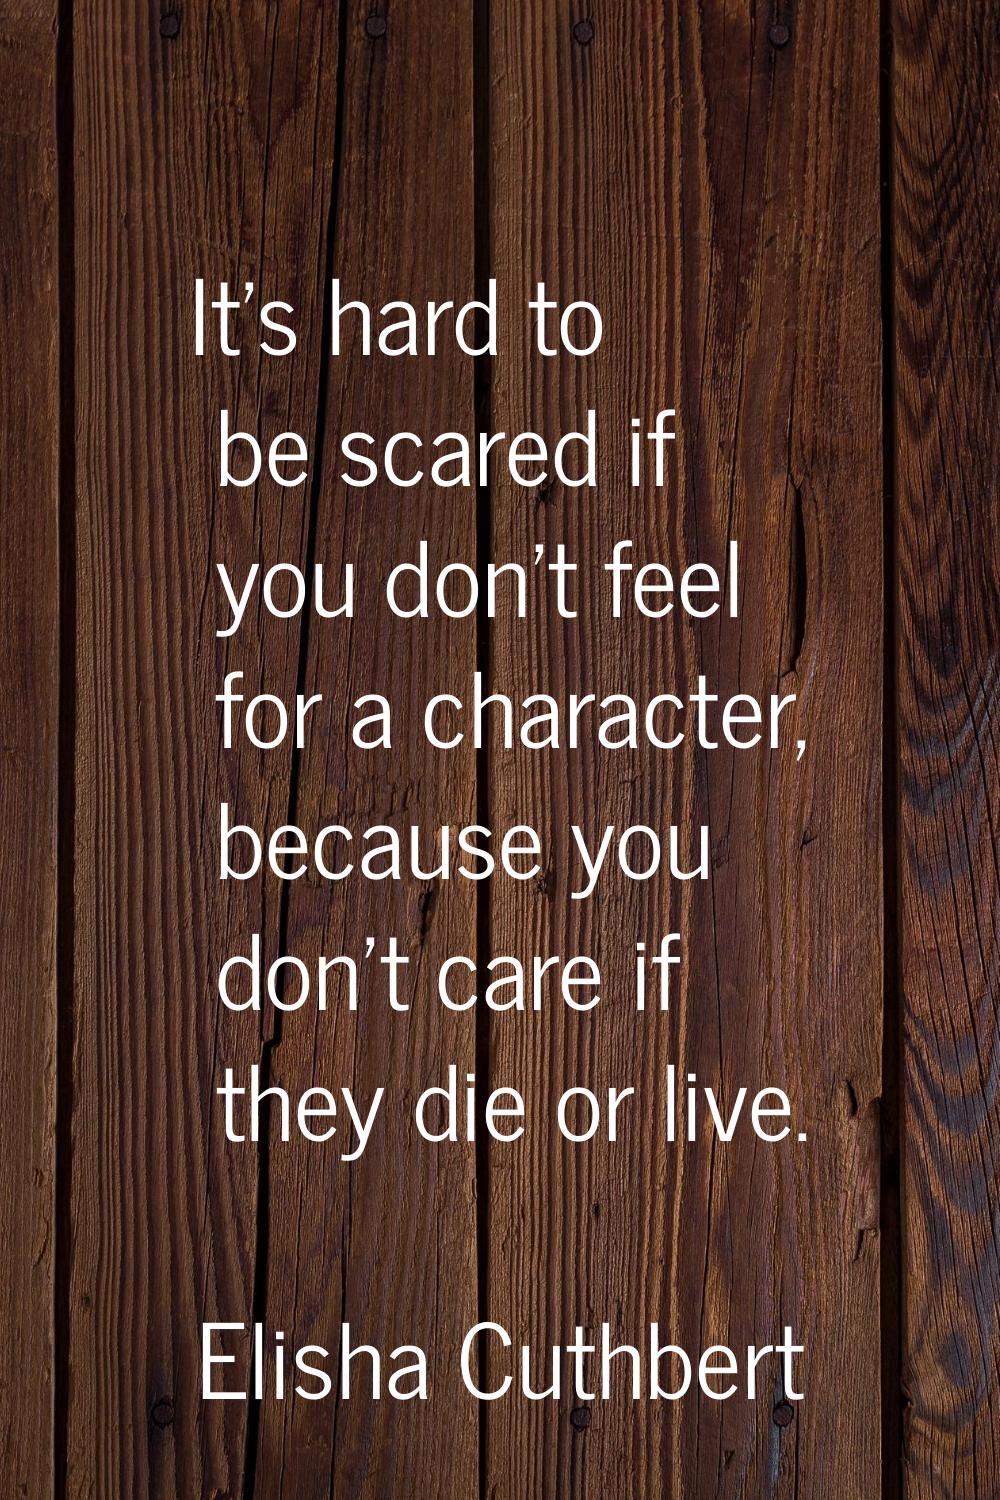 It's hard to be scared if you don't feel for a character, because you don't care if they die or liv